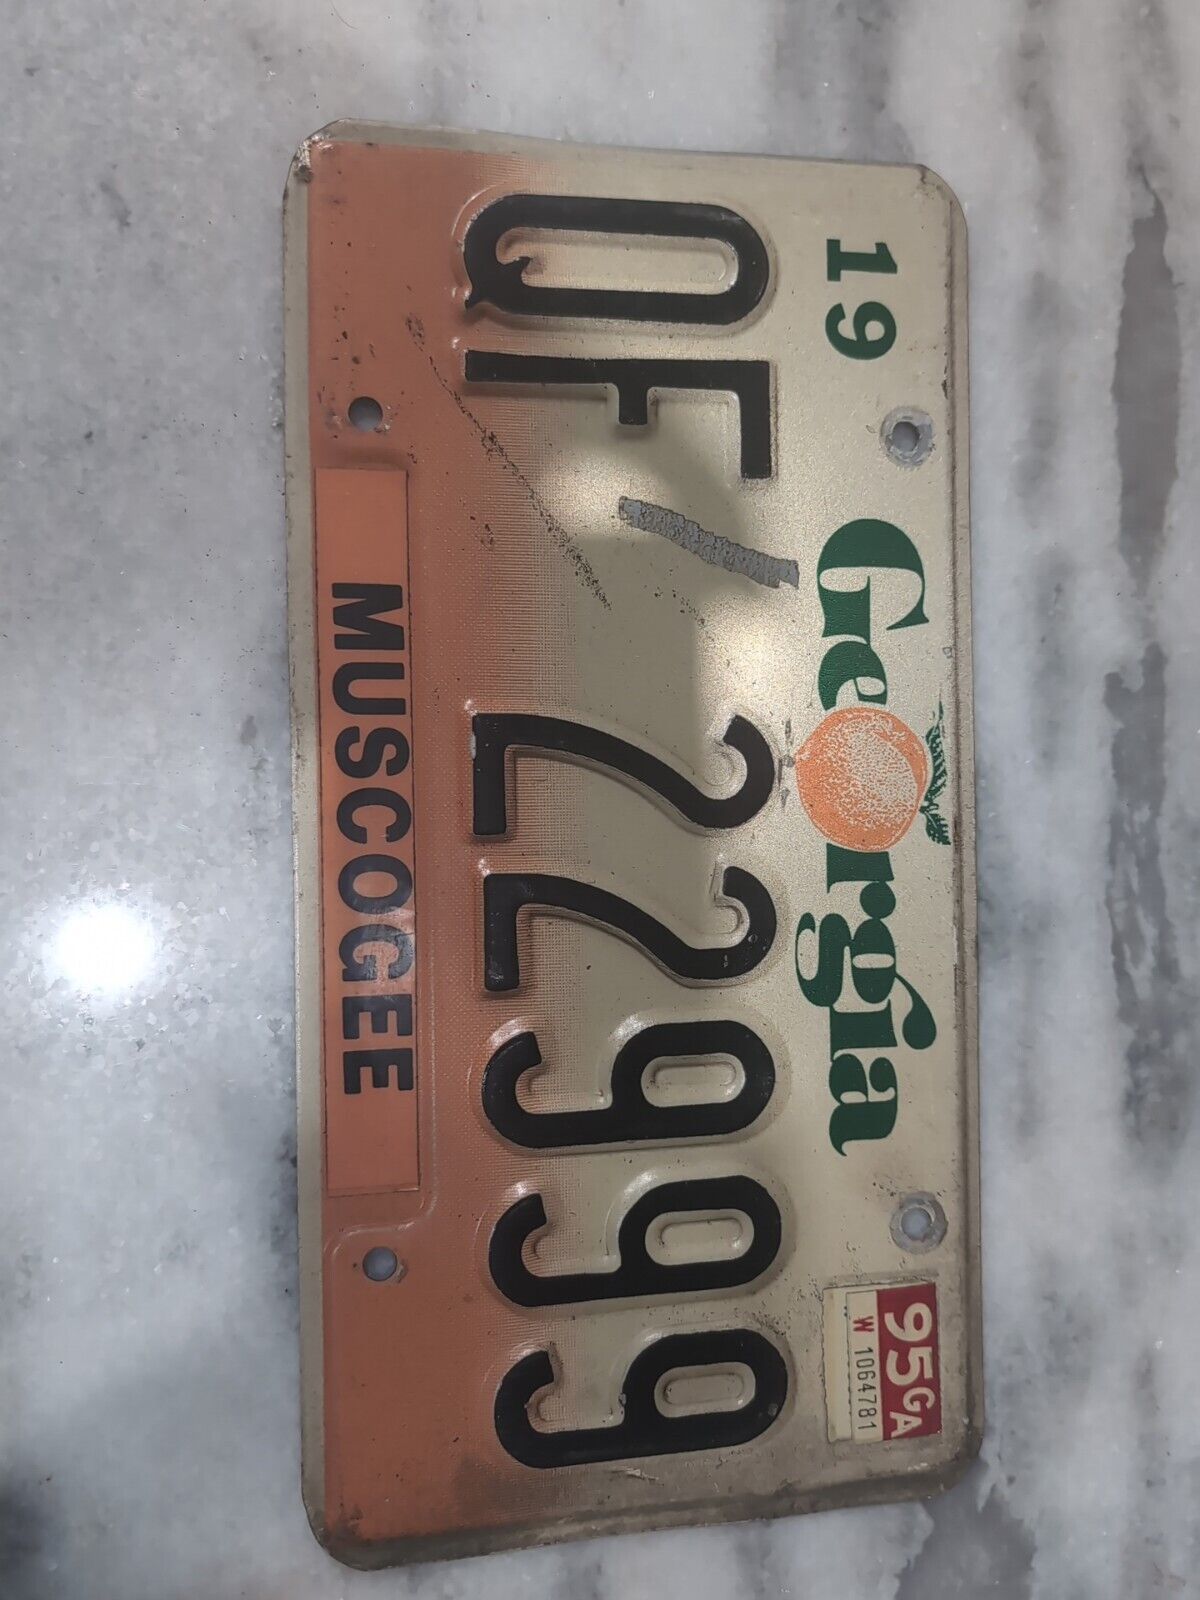 Vintage Georgia 1995 Muscogee County License Plate #QF 22999 Expired